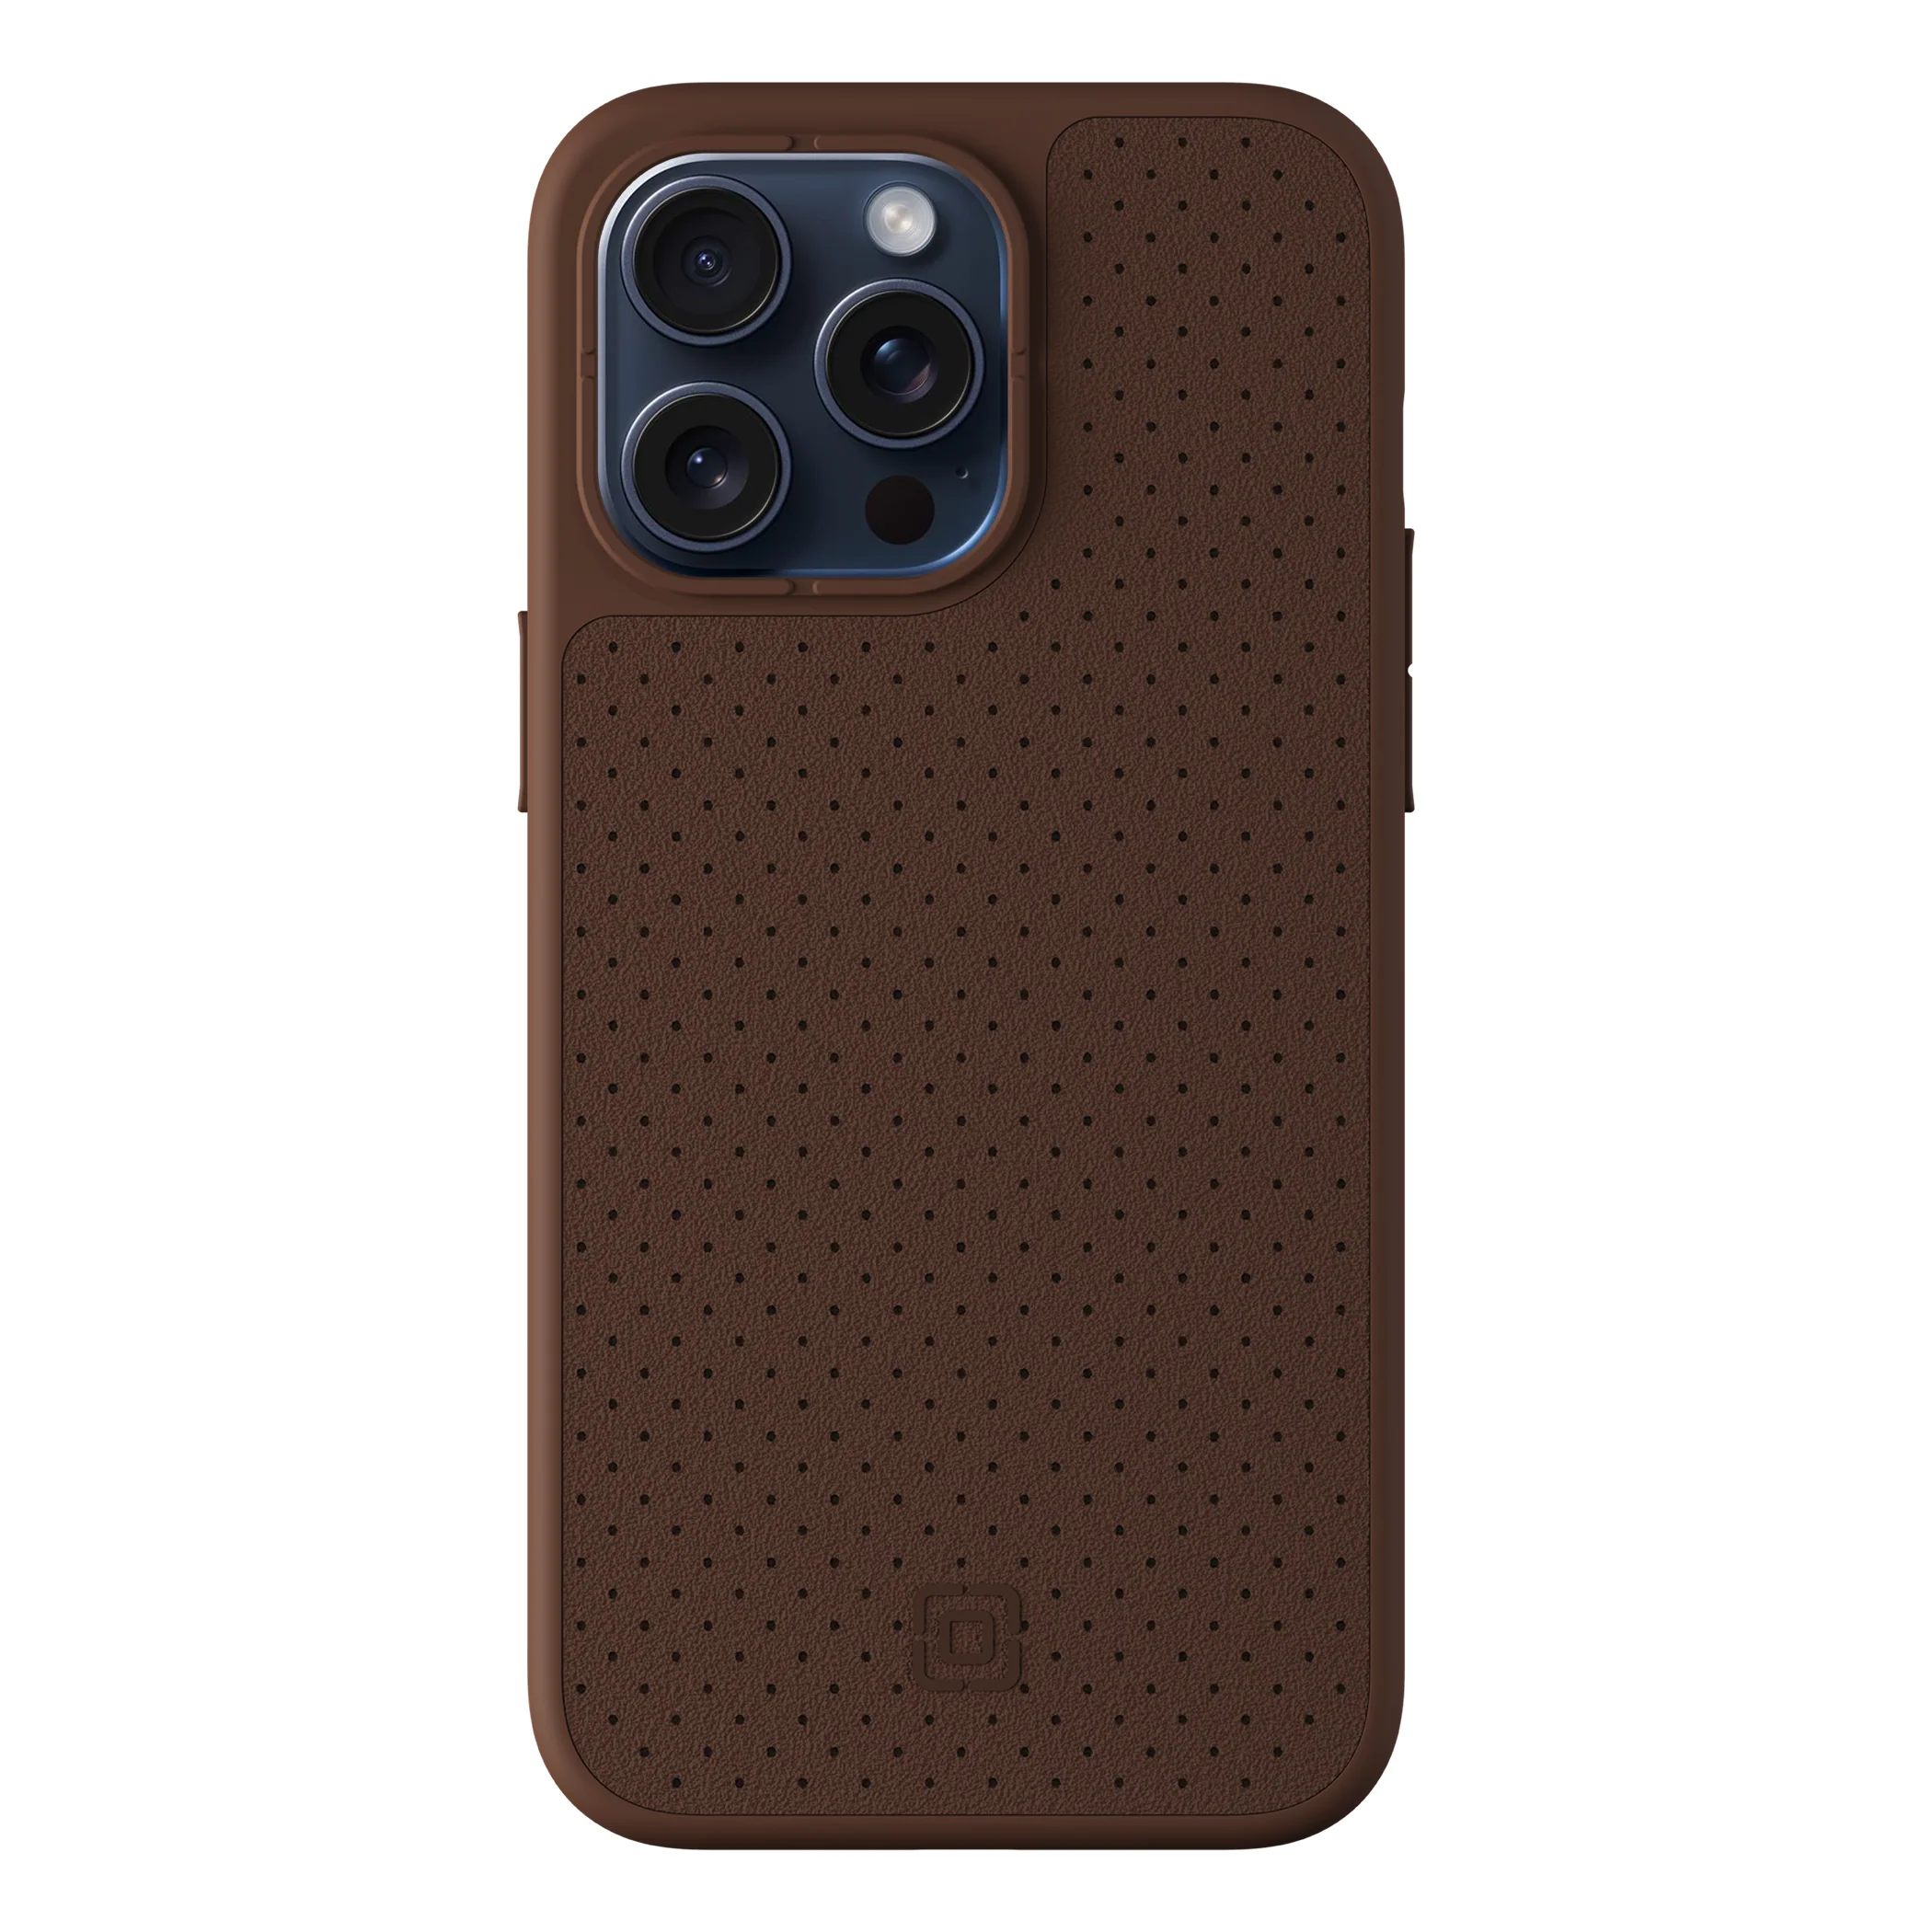 Incipio รุ่น cru. Protective for MagSafe - เคส iPhone 15 Pro Max - สี Brown Faux Leather